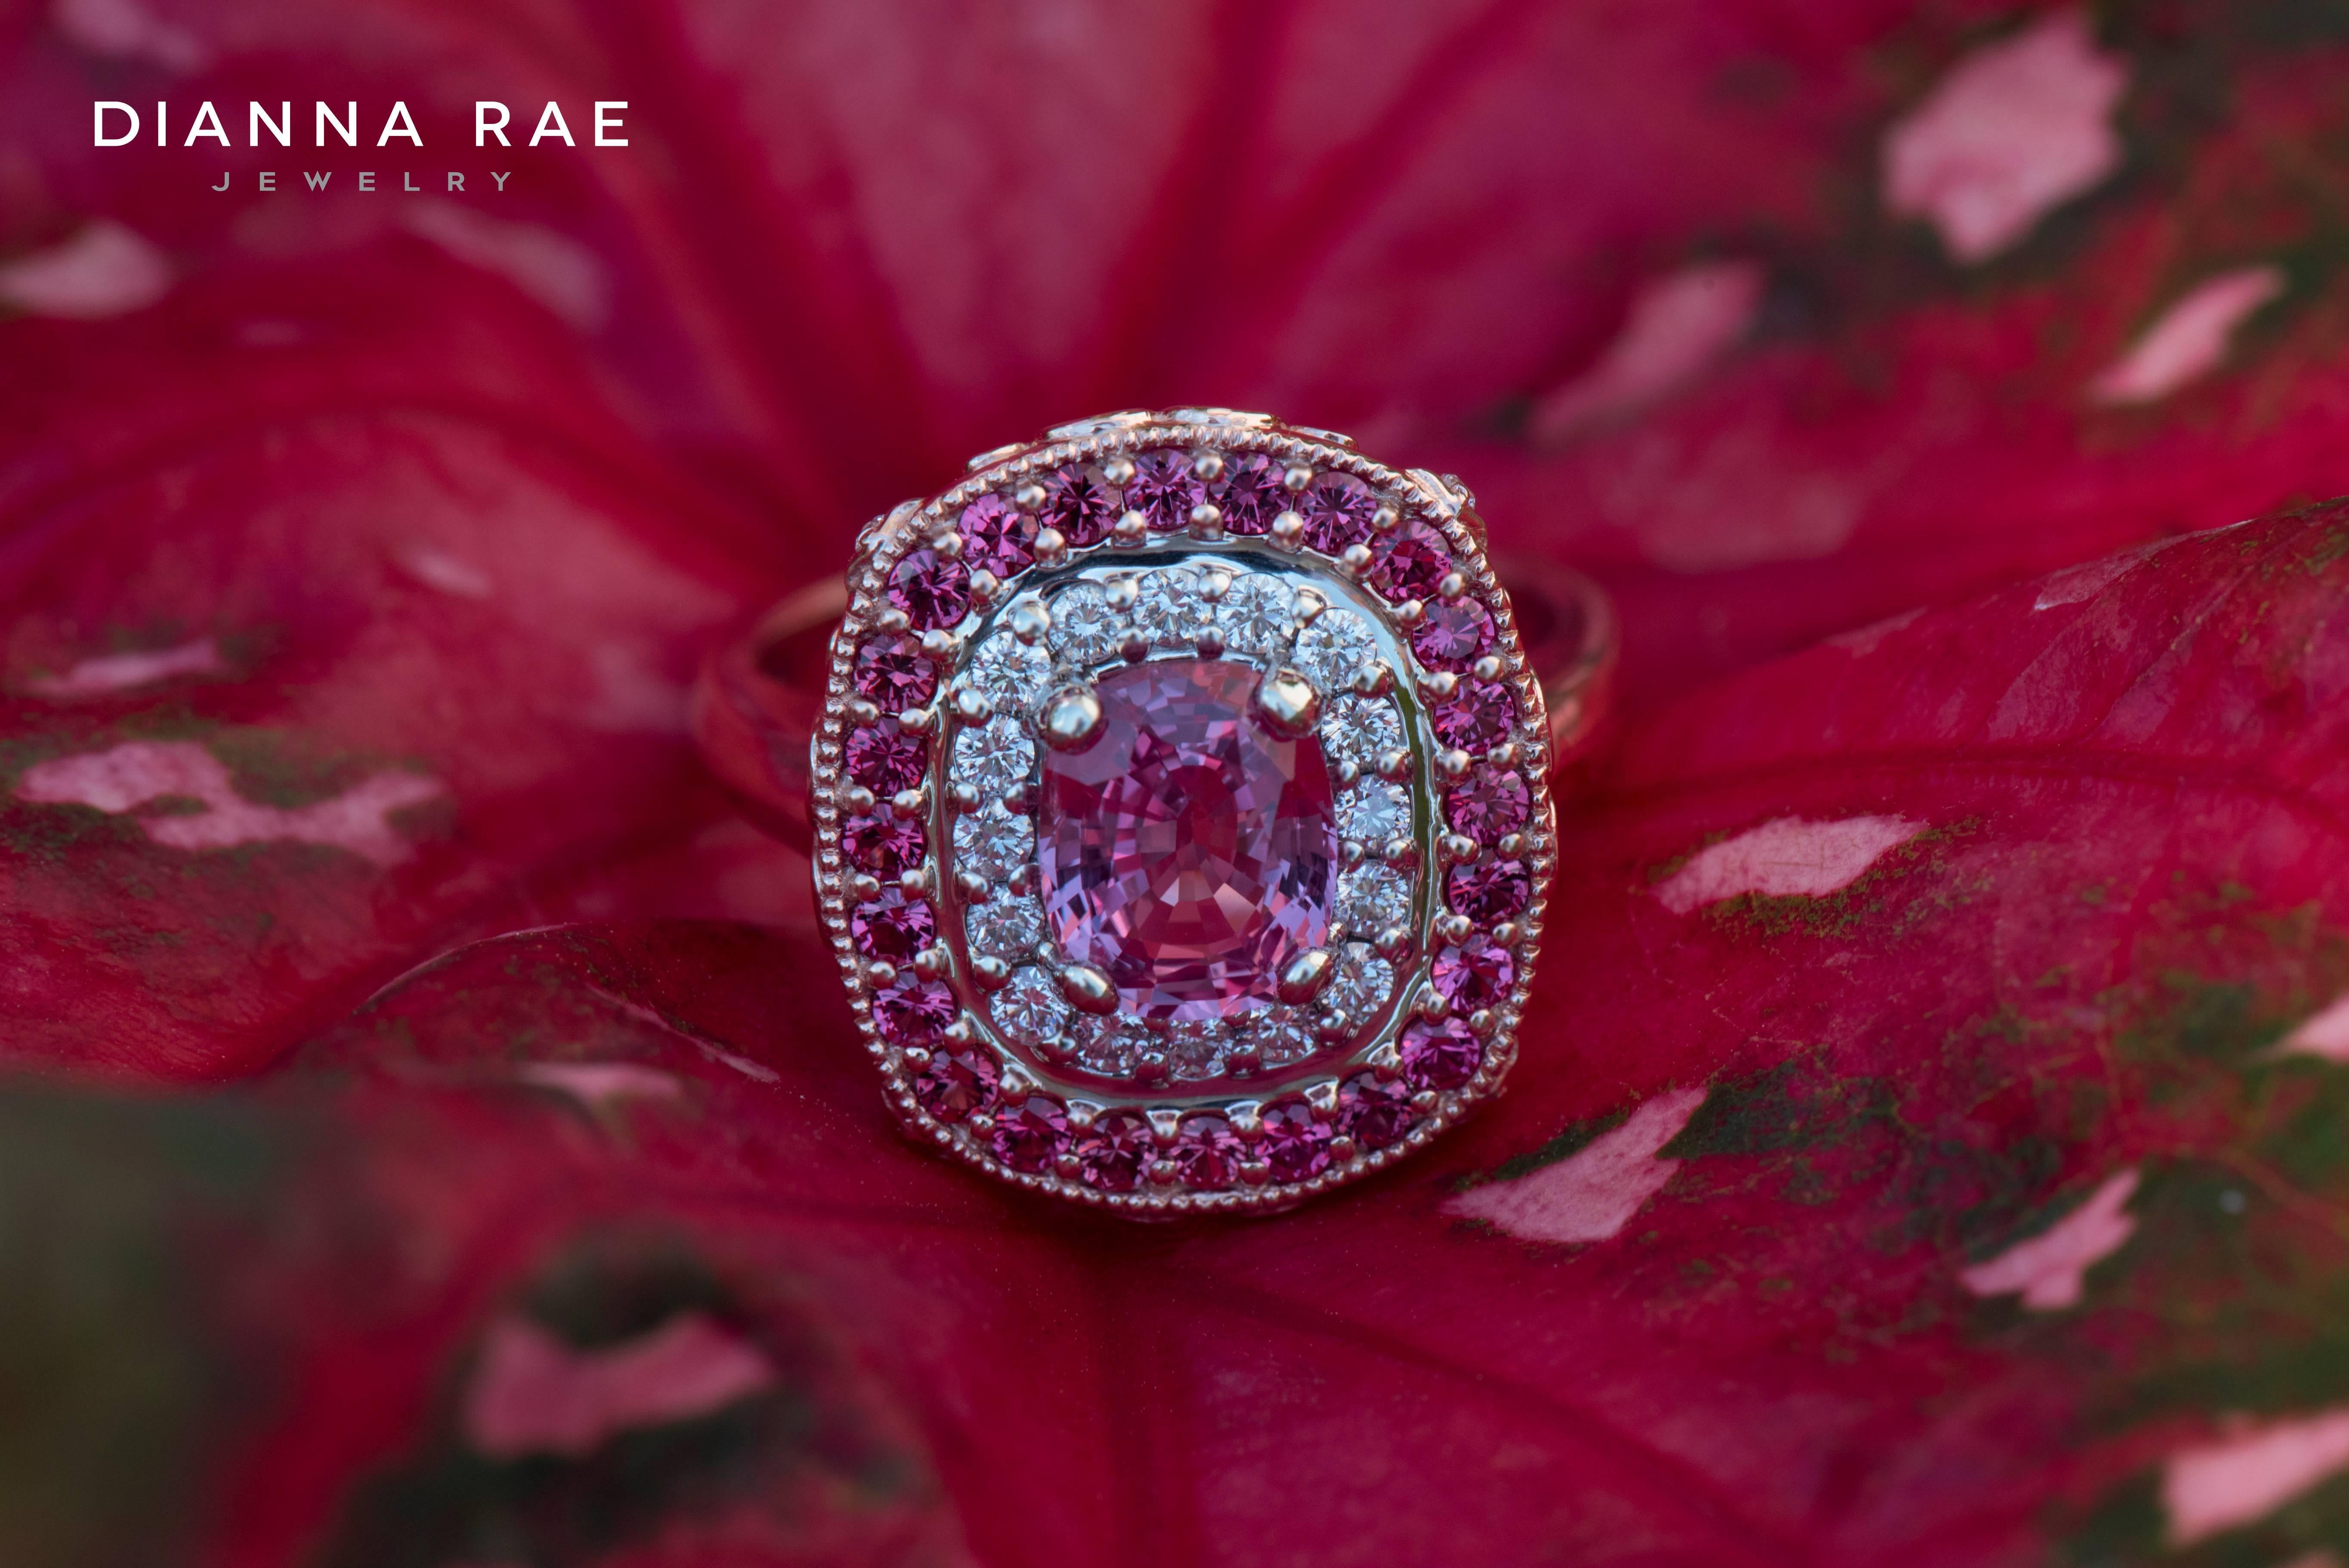 Contemporary 1.64 Carat Sri Lanka Pink Sapphire No Heat Ring with Pink Spinel Diamond Halo For Sale